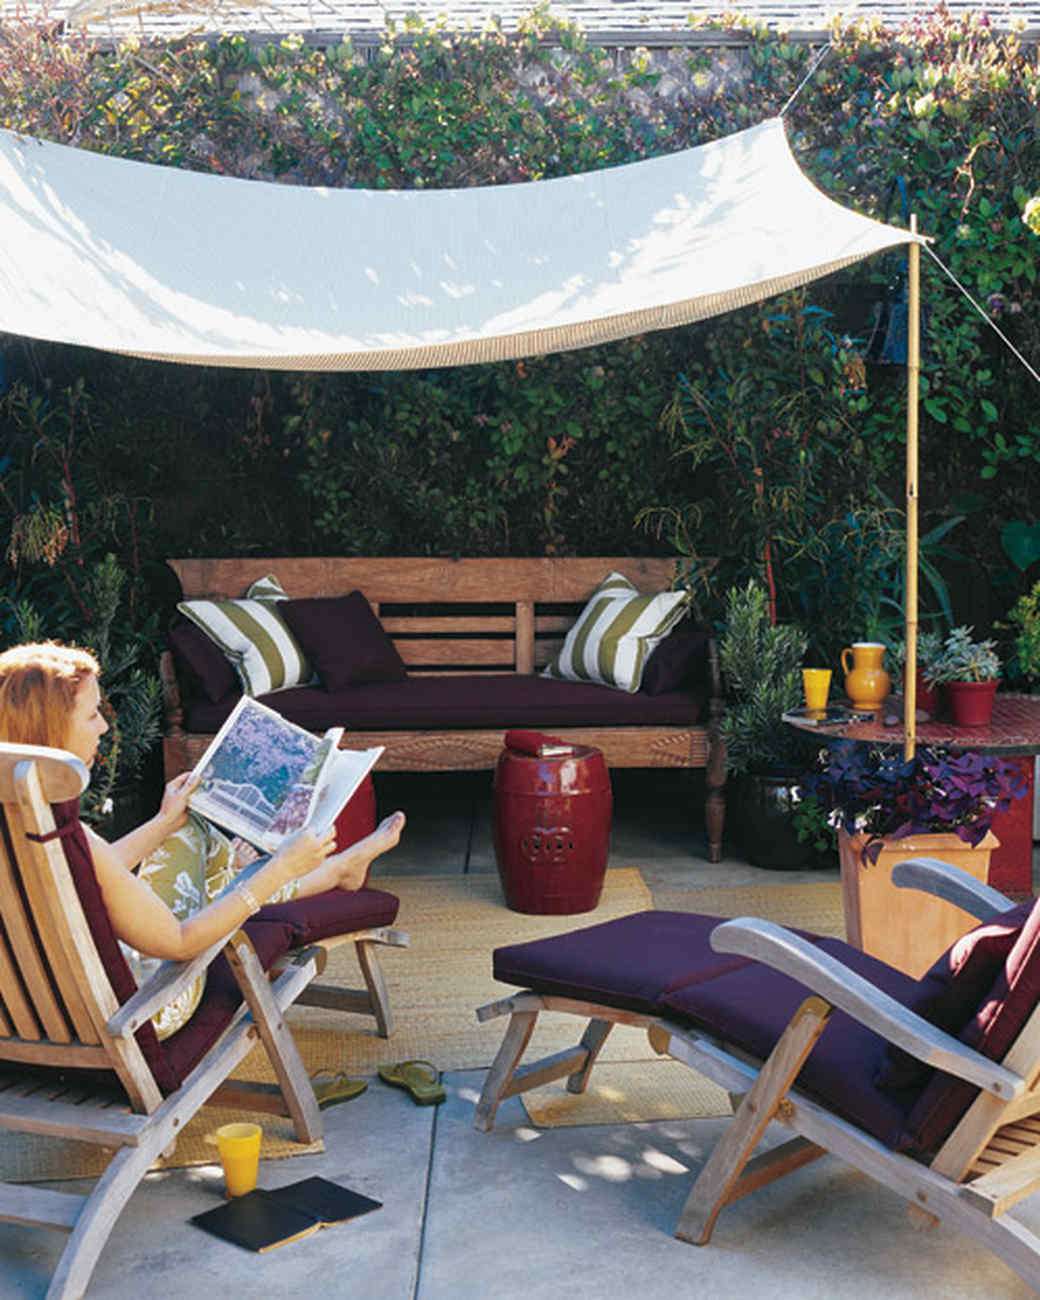 A Slice Of Shade Creating Canopies, Do It Yourself Outdoor Canopy Ideas